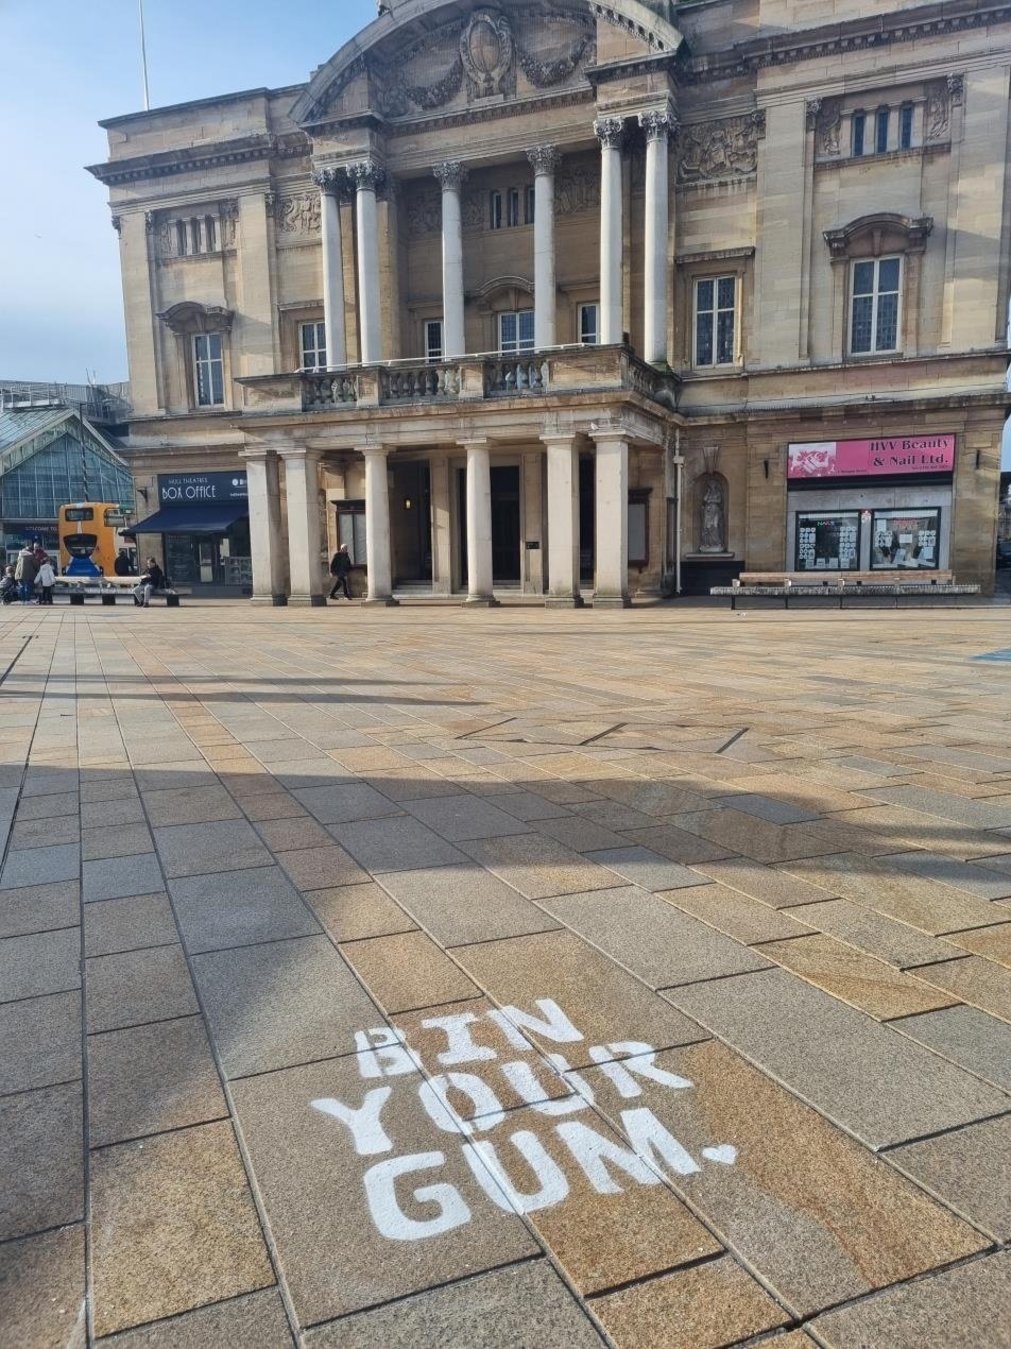 Bye, gum! Hull city centre gleaming after big chewing gum clean-up